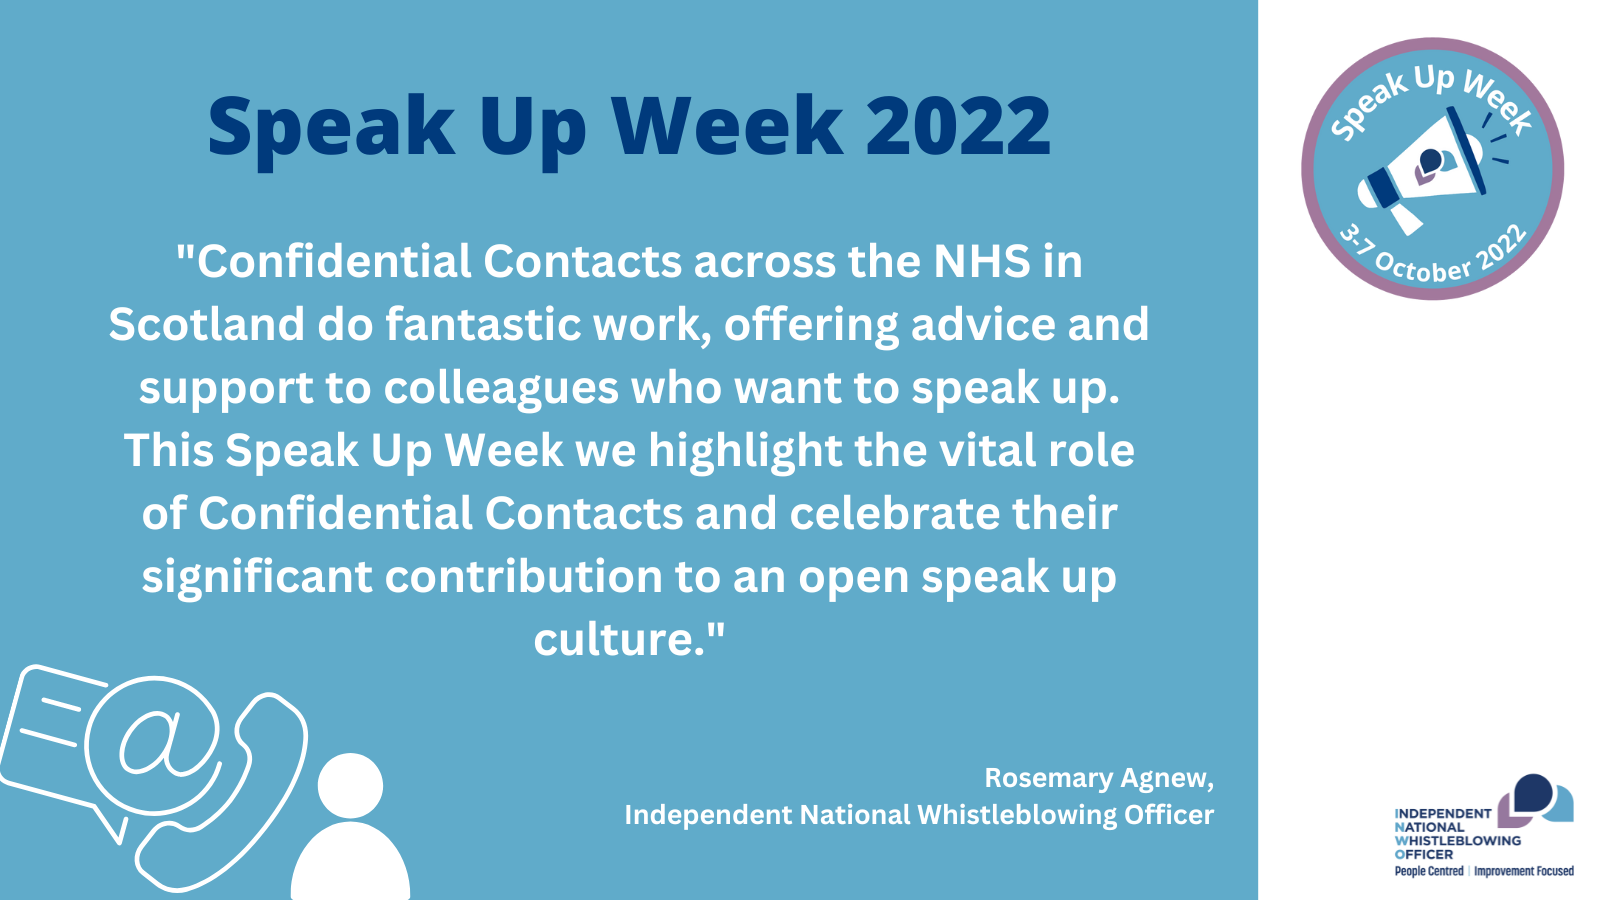 A quote from the INWO, Rosemary Agnew: "Confidential Contacts across the NHS in Scotland do fantastic work, offering advice and support to colleagues who want to speak up. This Speak Up Week we highlight the vital role of Confidential Contacts and celebrate their significant contribution to an open speak up culture."